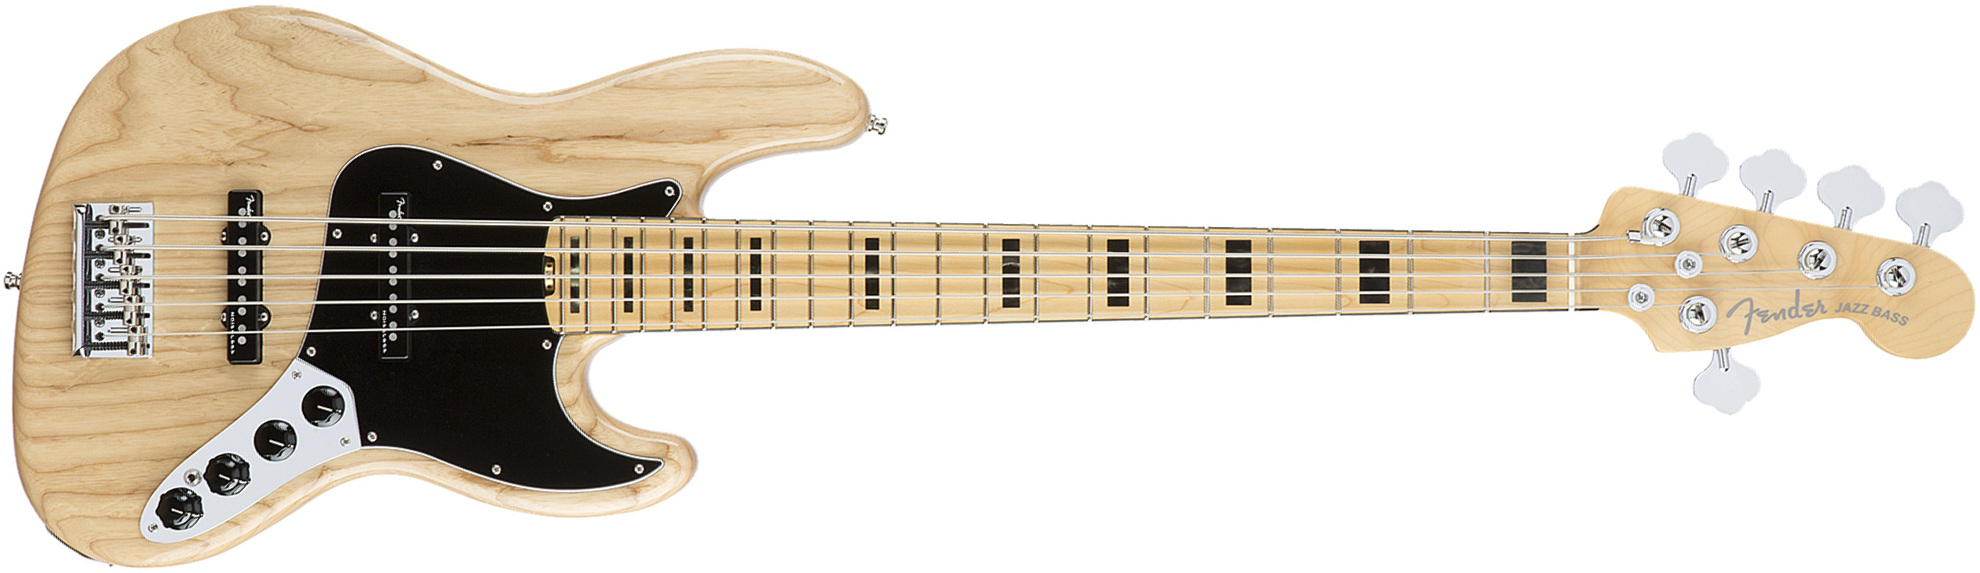 Fender Jazz Bass American Elite V Ash 5 Cordes 2016 (usa, Mn) - Natural - Solid body electric bass - Main picture